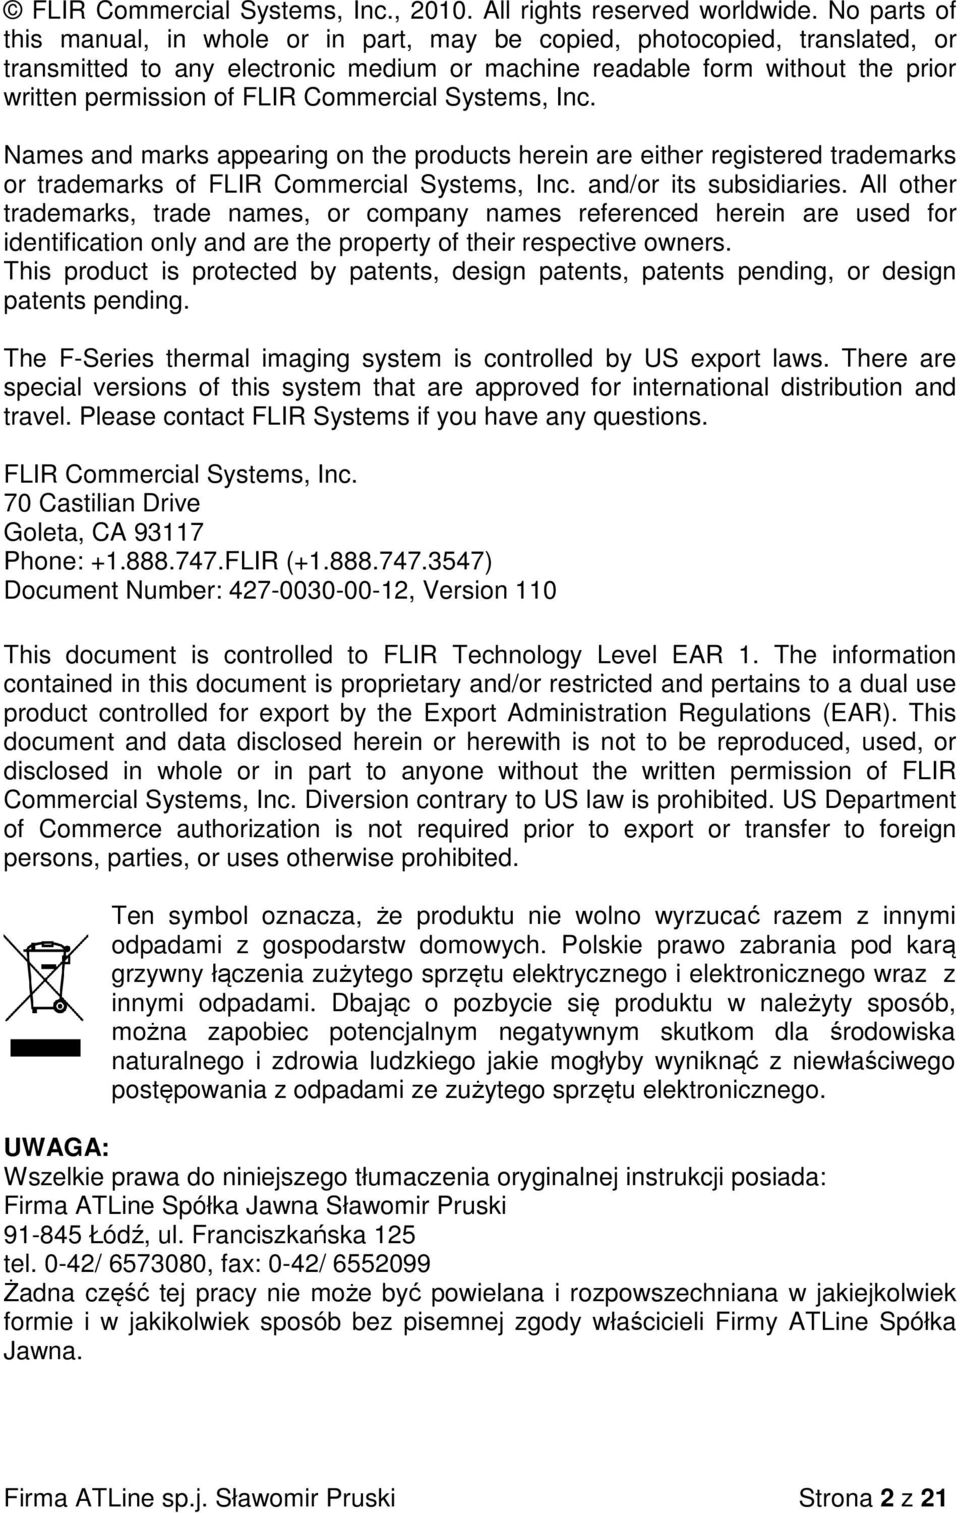 Commercial Systems, Inc. Names and marks appearing on the products herein are either registered trademarks or trademarks of FLIR Commercial Systems, Inc. and/or its subsidiaries.